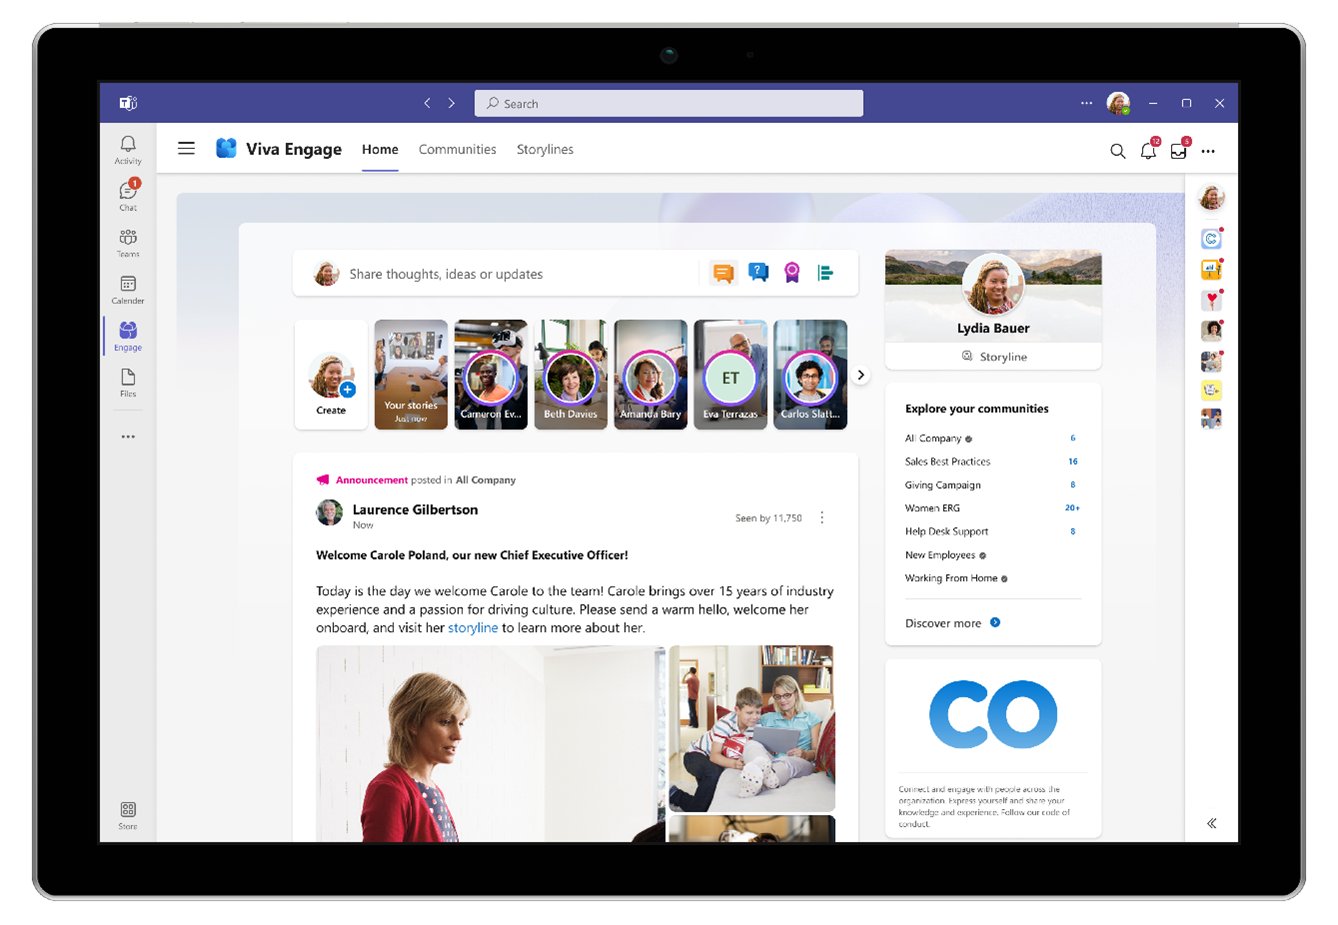 Yammer: A rebrand into Viva Engage